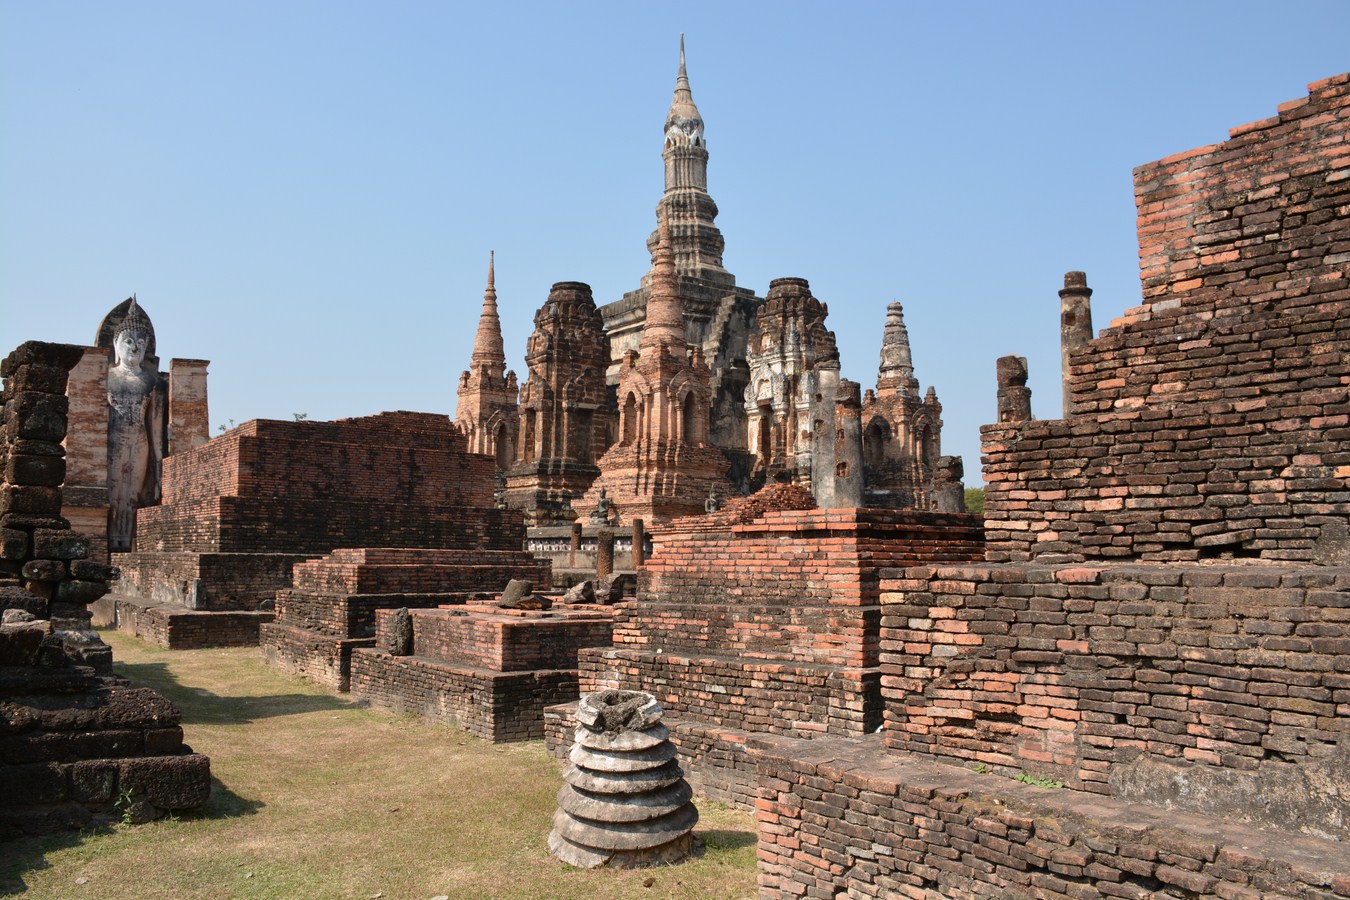 a large, brick building surrounded by ruins with towers